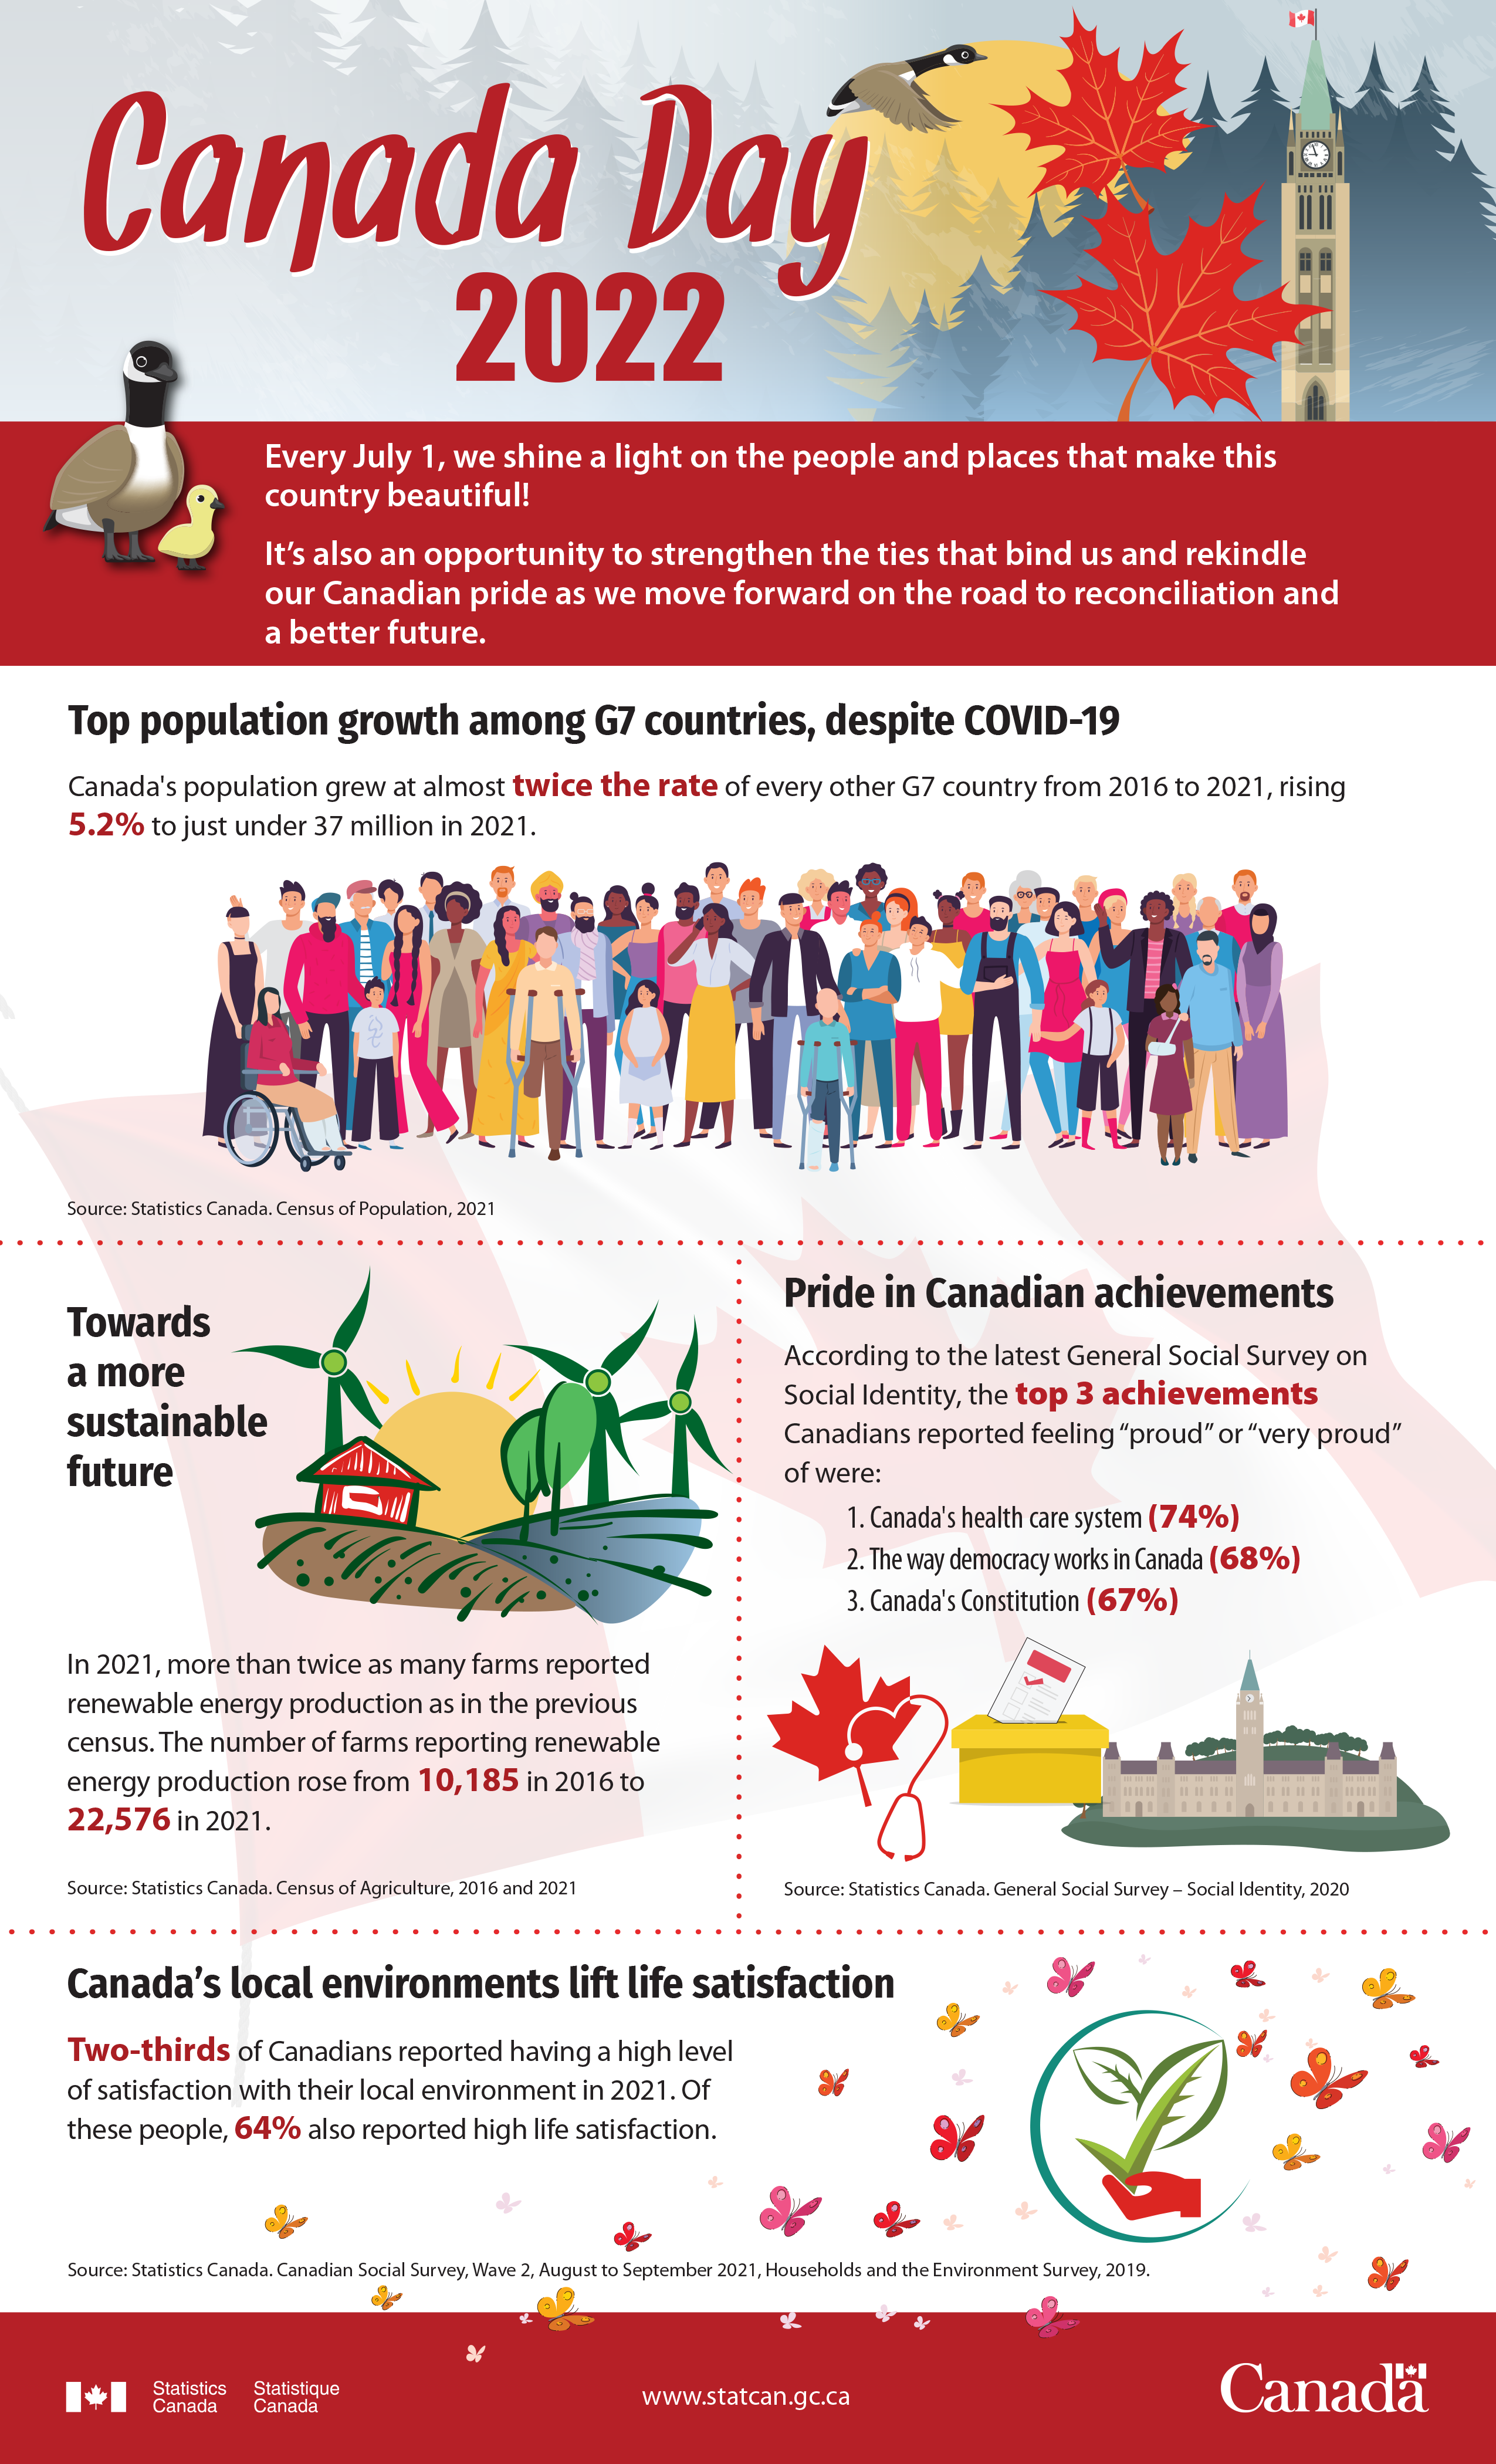 By the numbers - Canada Day 2022